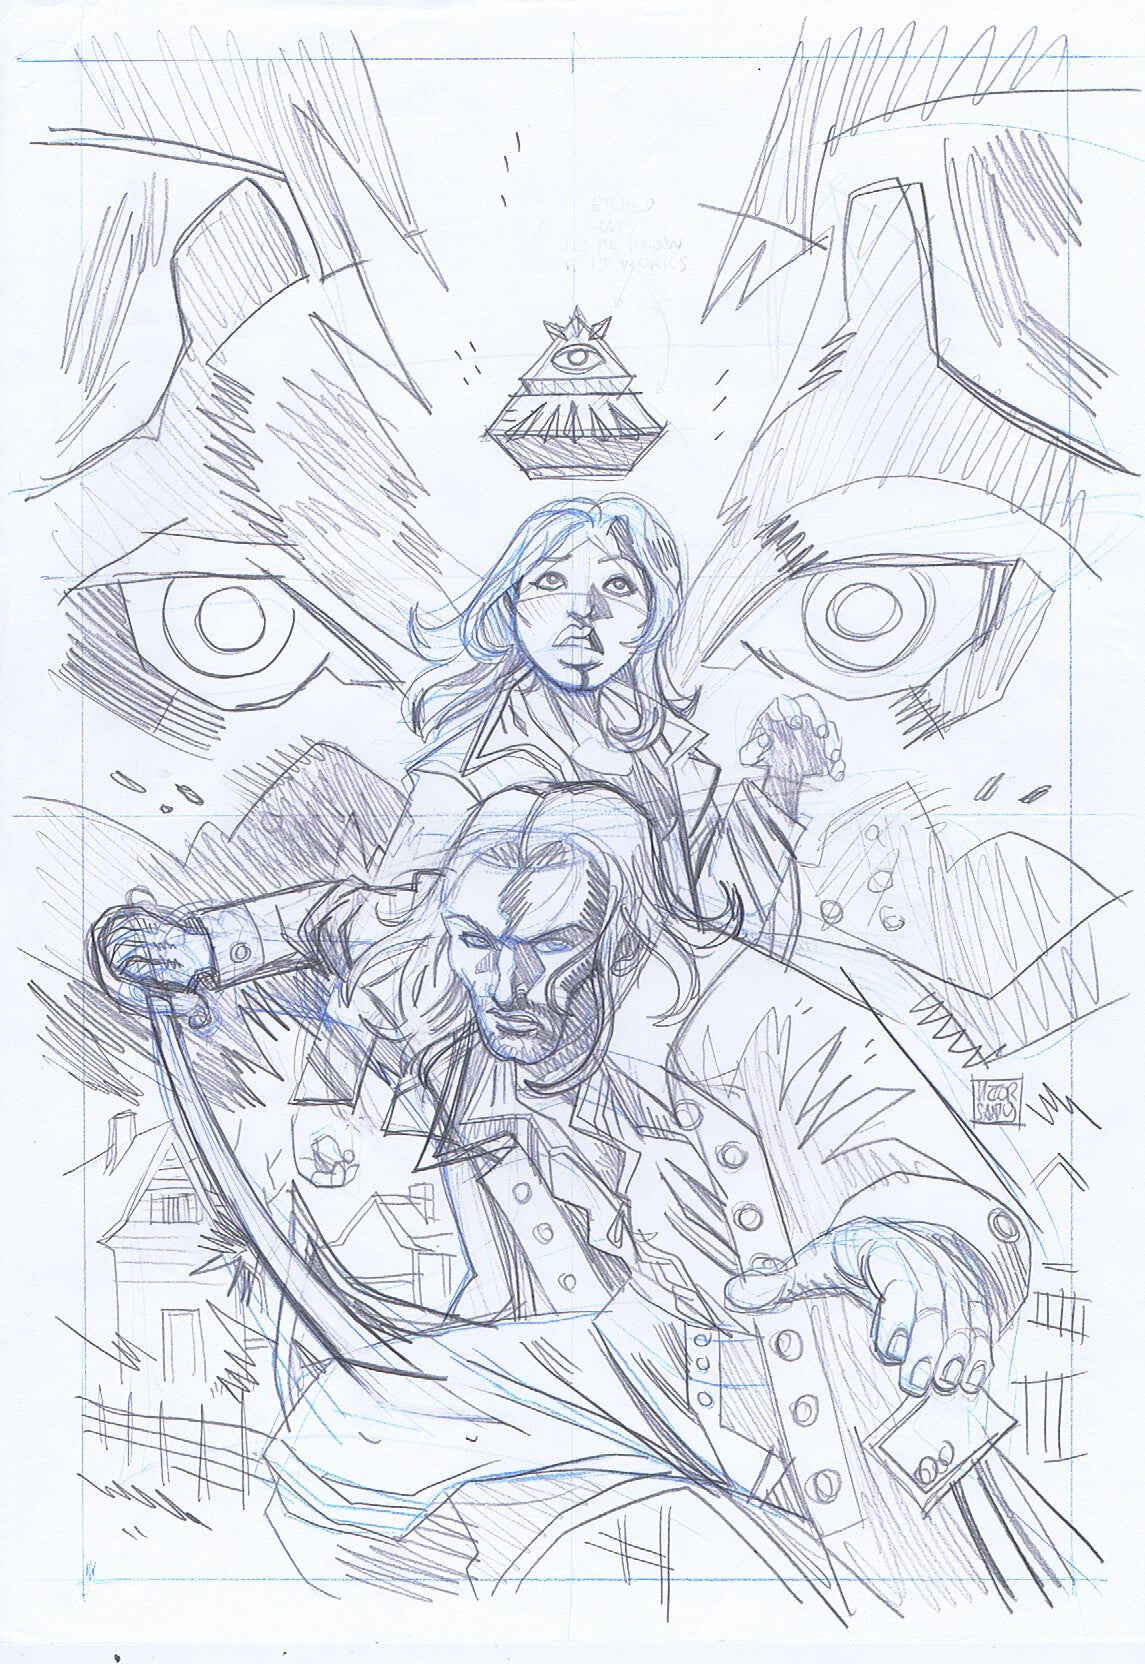 Sleepy Hollow #4 Cover + Layout